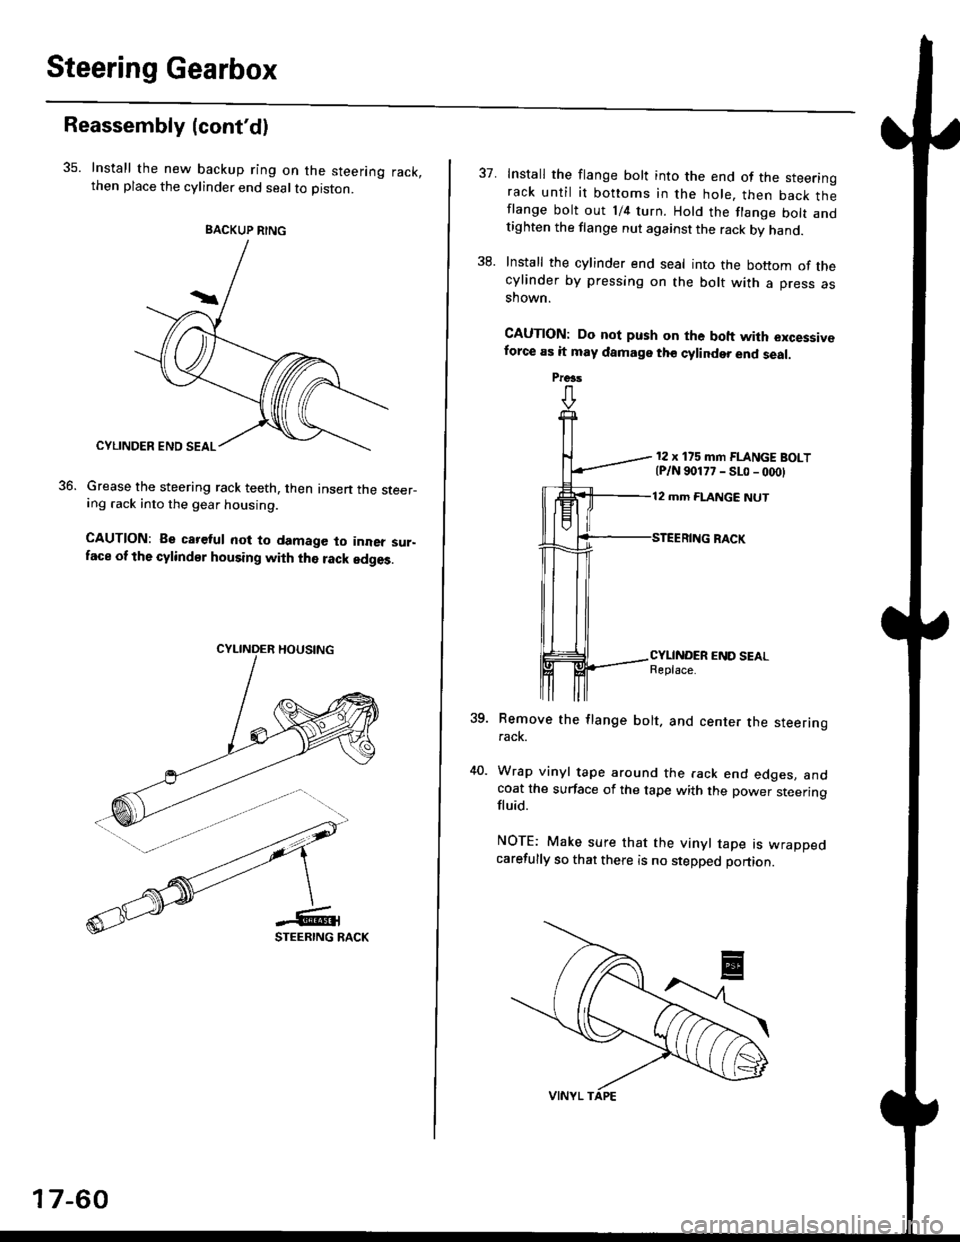 HONDA CIVIC 1998 6.G Service Manual Steering Gearbox
Reassembly {contd)
35. Install the new backup ring on the steering rack,then place the cylinder end seal to piston.
Grease the steering rack teeth, then Insen the steer-ing .ack into